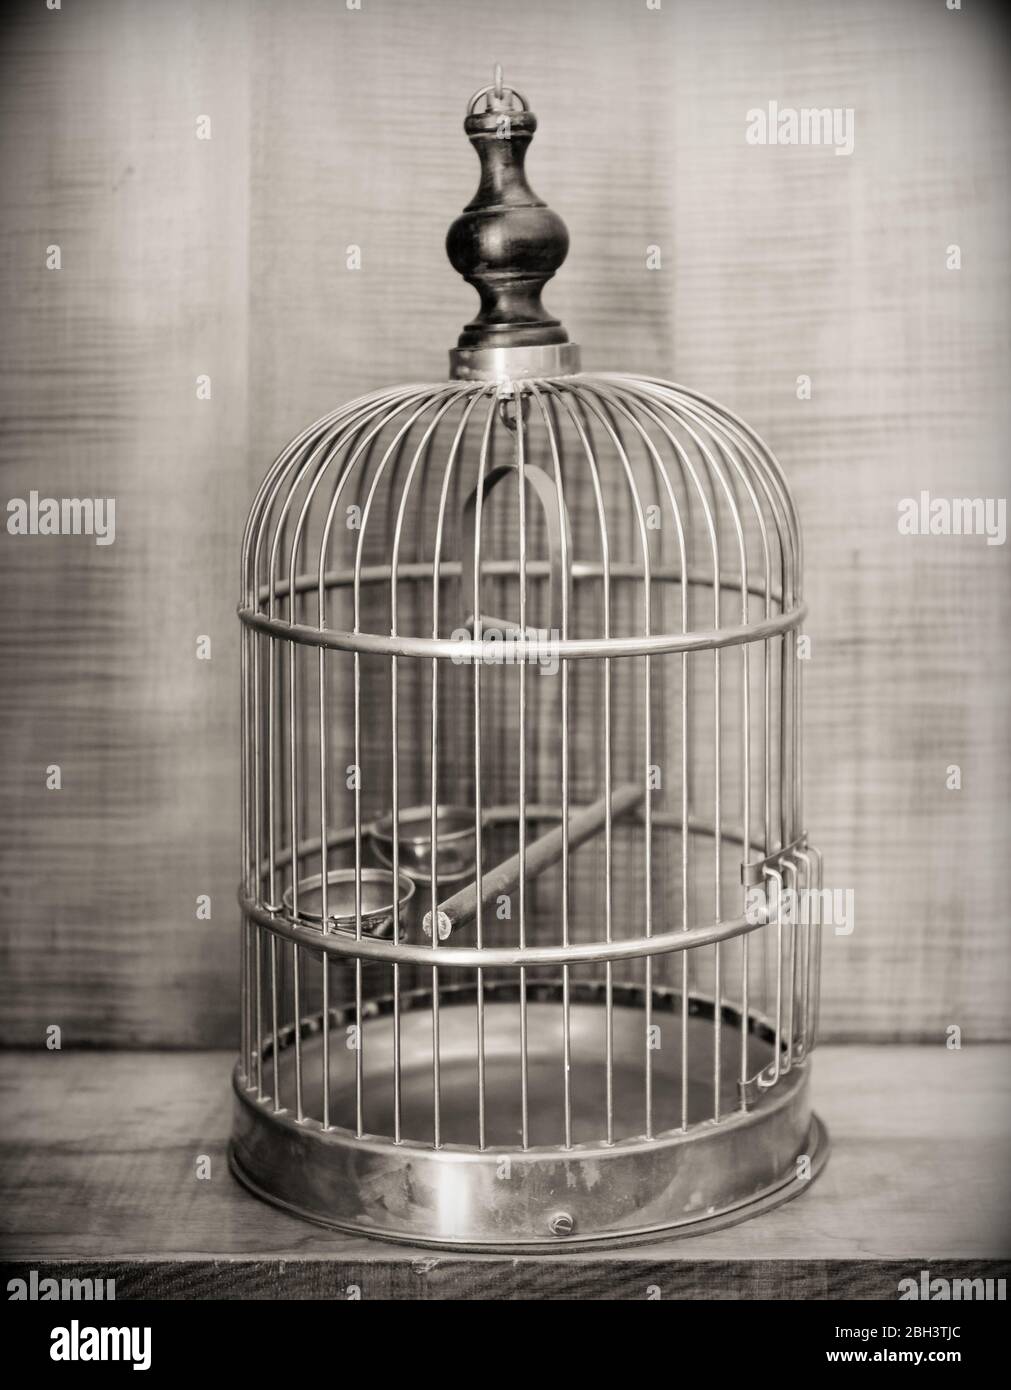 https://c8.alamy.com/comp/2BH3TJC/black-and-white-image-of-large-english-vintage-brass-birdcage-with-wood-and-brass-swing-long-wooden-perch-and-two-brass-feeders-2BH3TJC.jpg